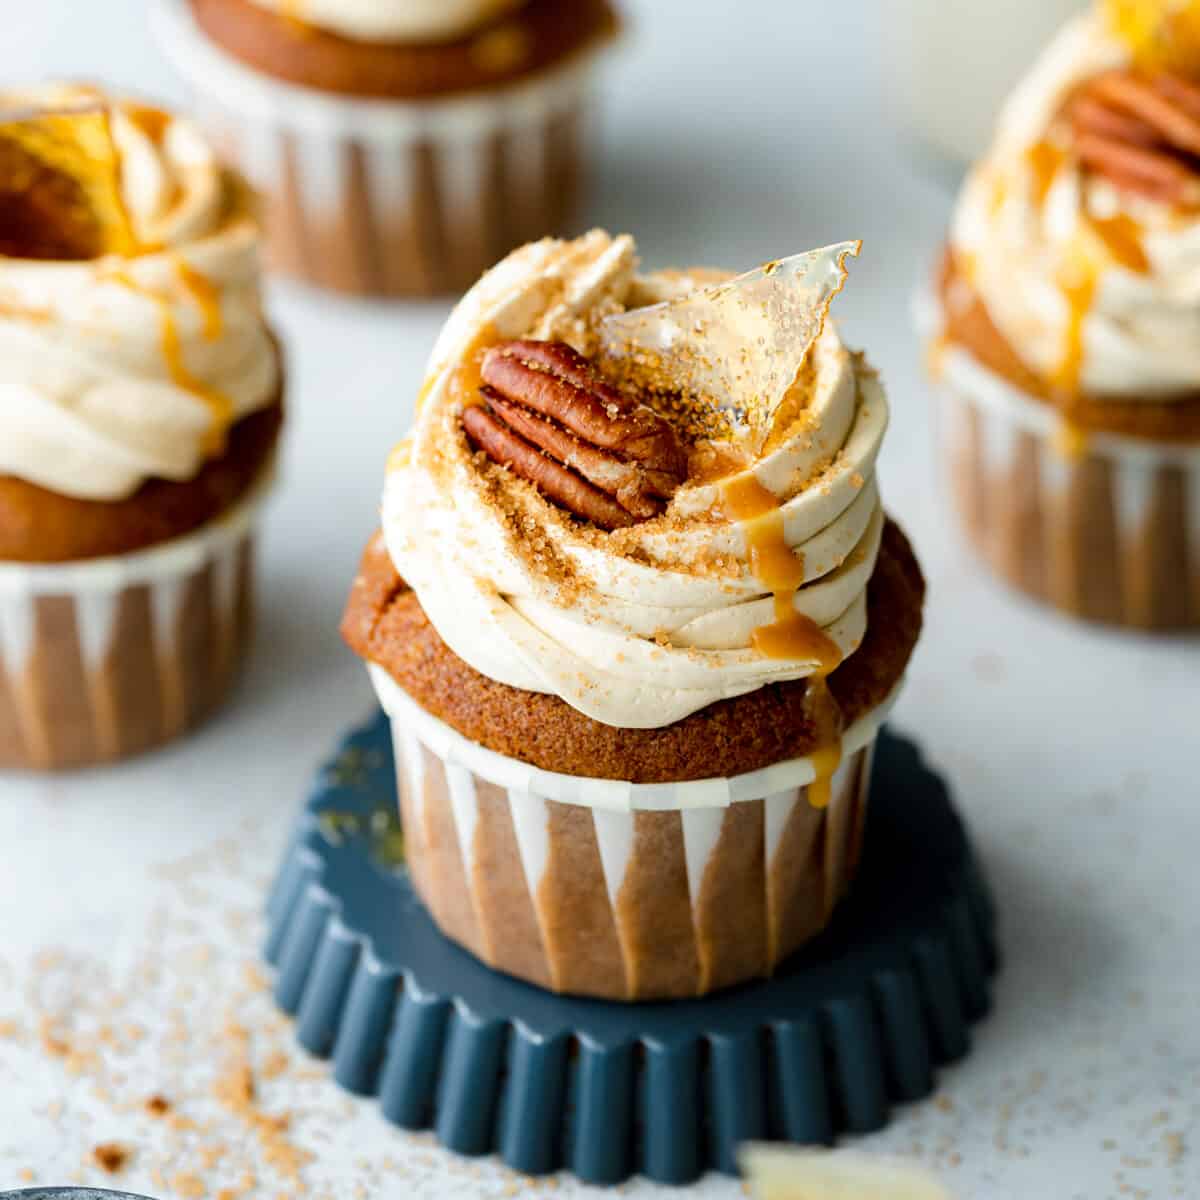 frosted cupcakes with pecans and caramel sauce on top.